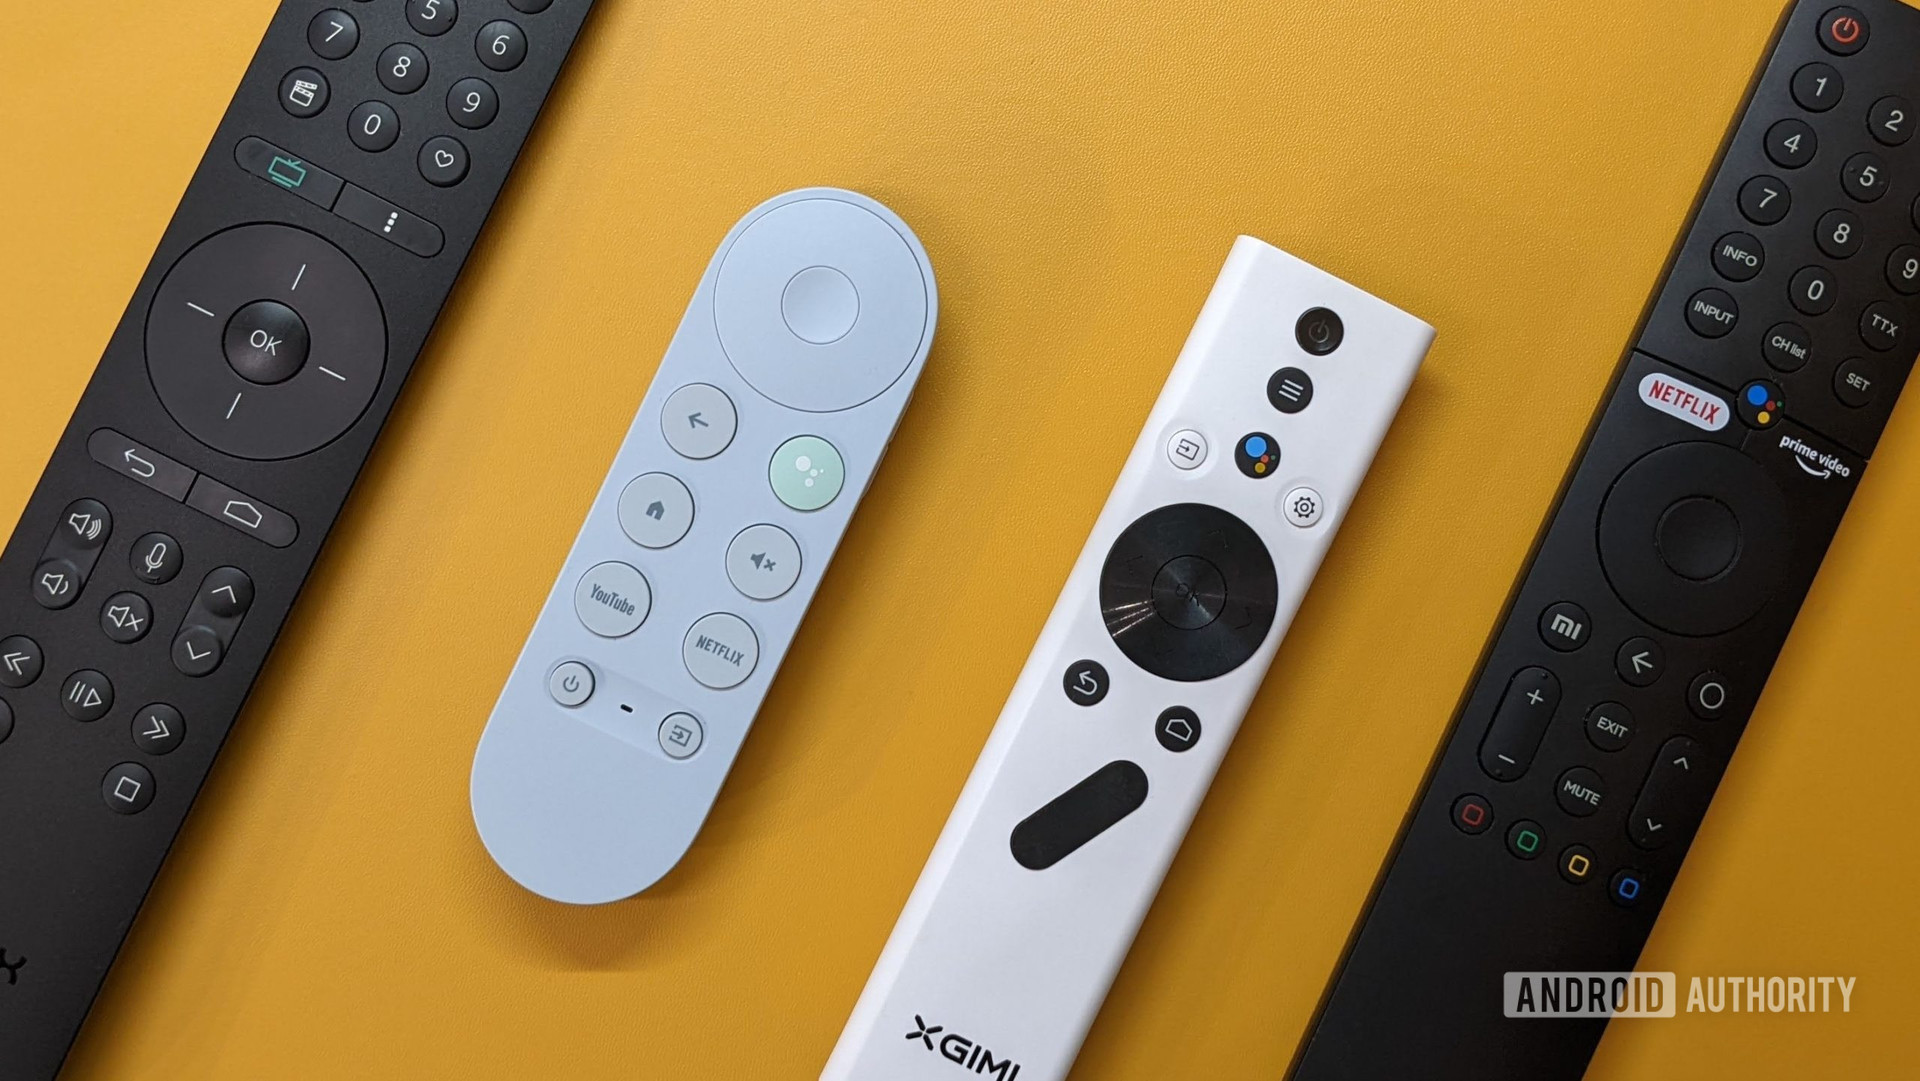 Four Android TV remotes on a yellow background, including chromecast with google tv remote